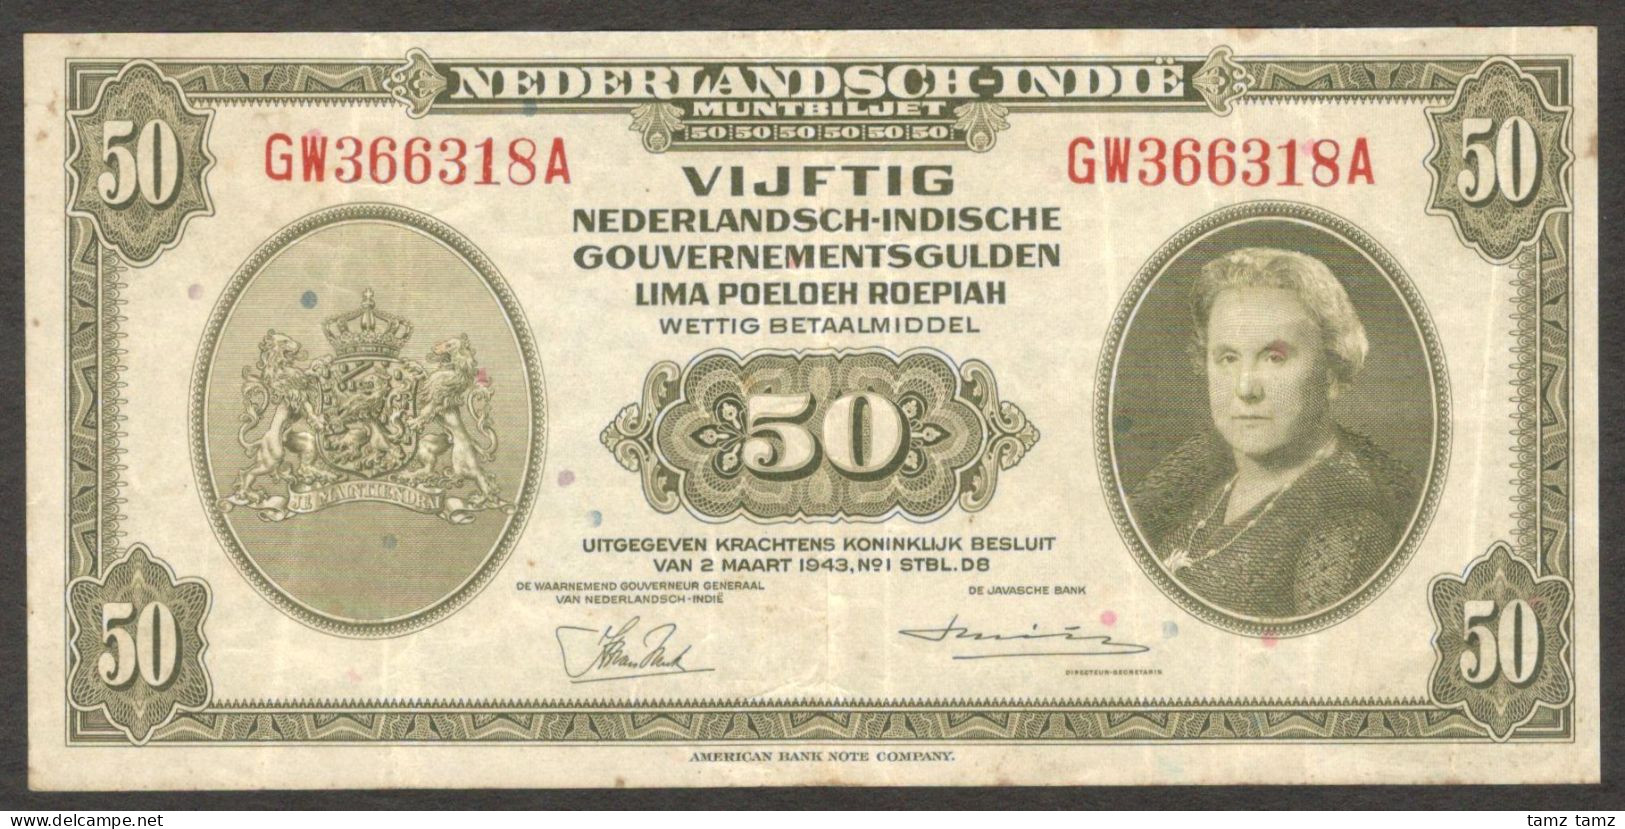 Netherlands Indies Civil Administration NICA Indonesia 50 Gulden P-116 1943 VF - Indonesia